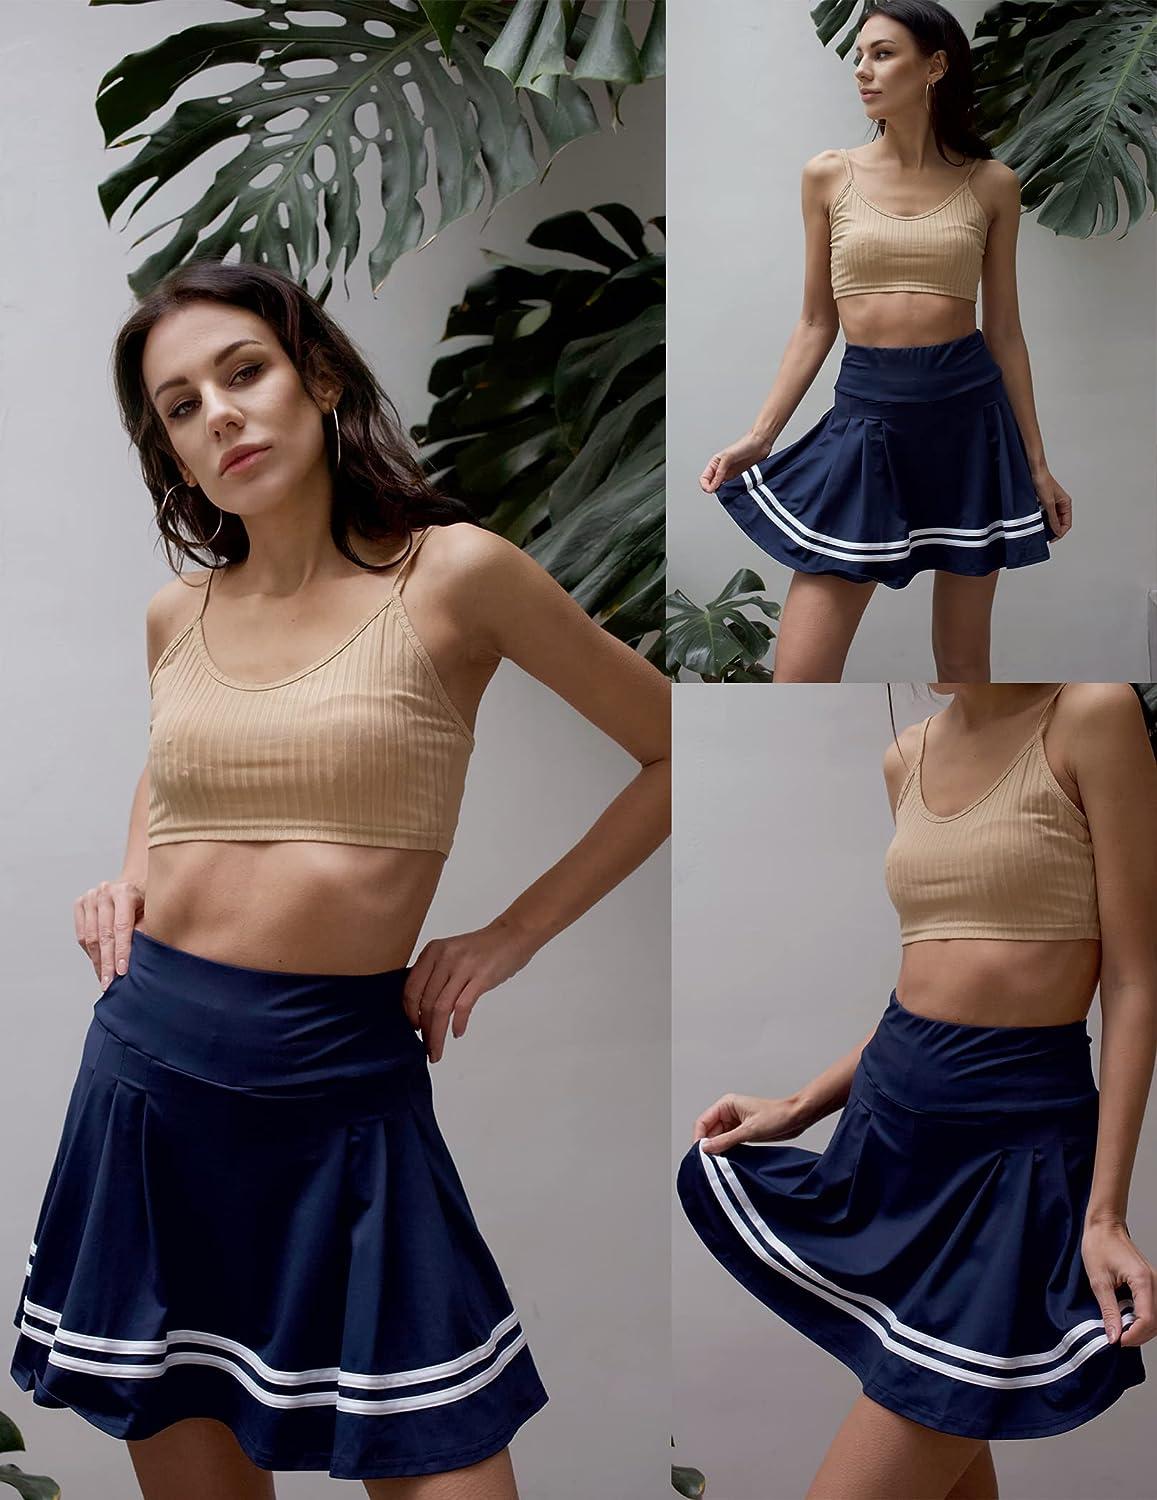  Pleated Tennis Skirt Womens Athletic Golf Skort Activewear  Built-in Shorts Sport Outfits Workout Running Mini Skirts Navy Blue